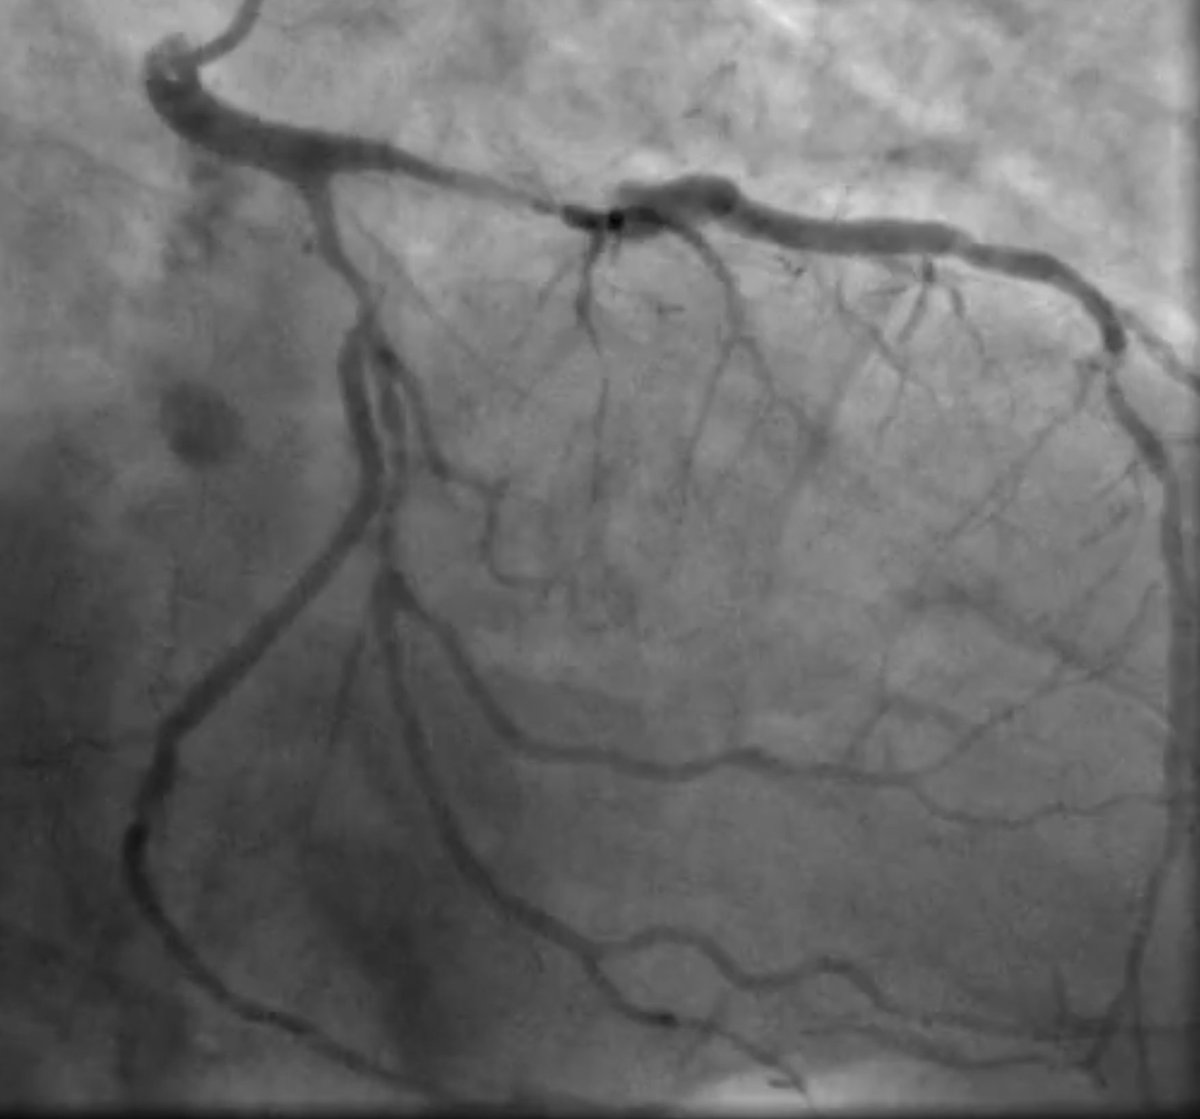 67 yr male presenting with heart failure (NYHA II), CMR EF 31%, transmural LGE in lateral/anterolat segments. Angiogram: 3VD (calcified prox LAD, severe LCx/OM1, CTO RCA). Surgical turndown due to airways disease. Complete, partial or no revasc? Poll below 👇 #EuroPCR #JACC